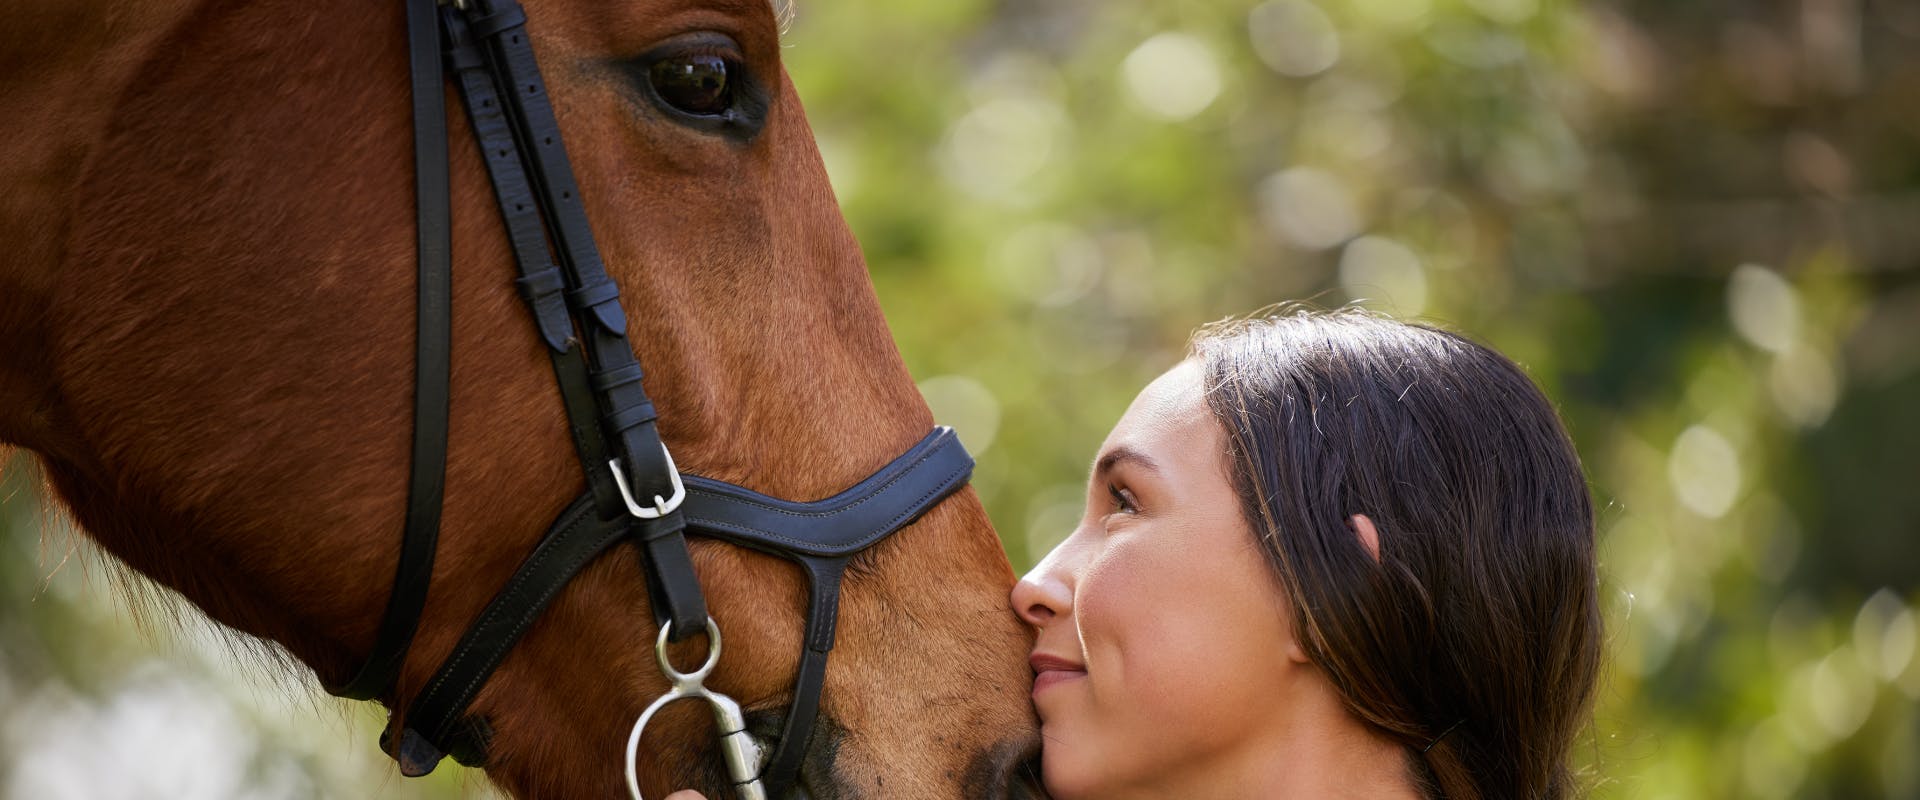 a woman caring for a horse by hugging its nose